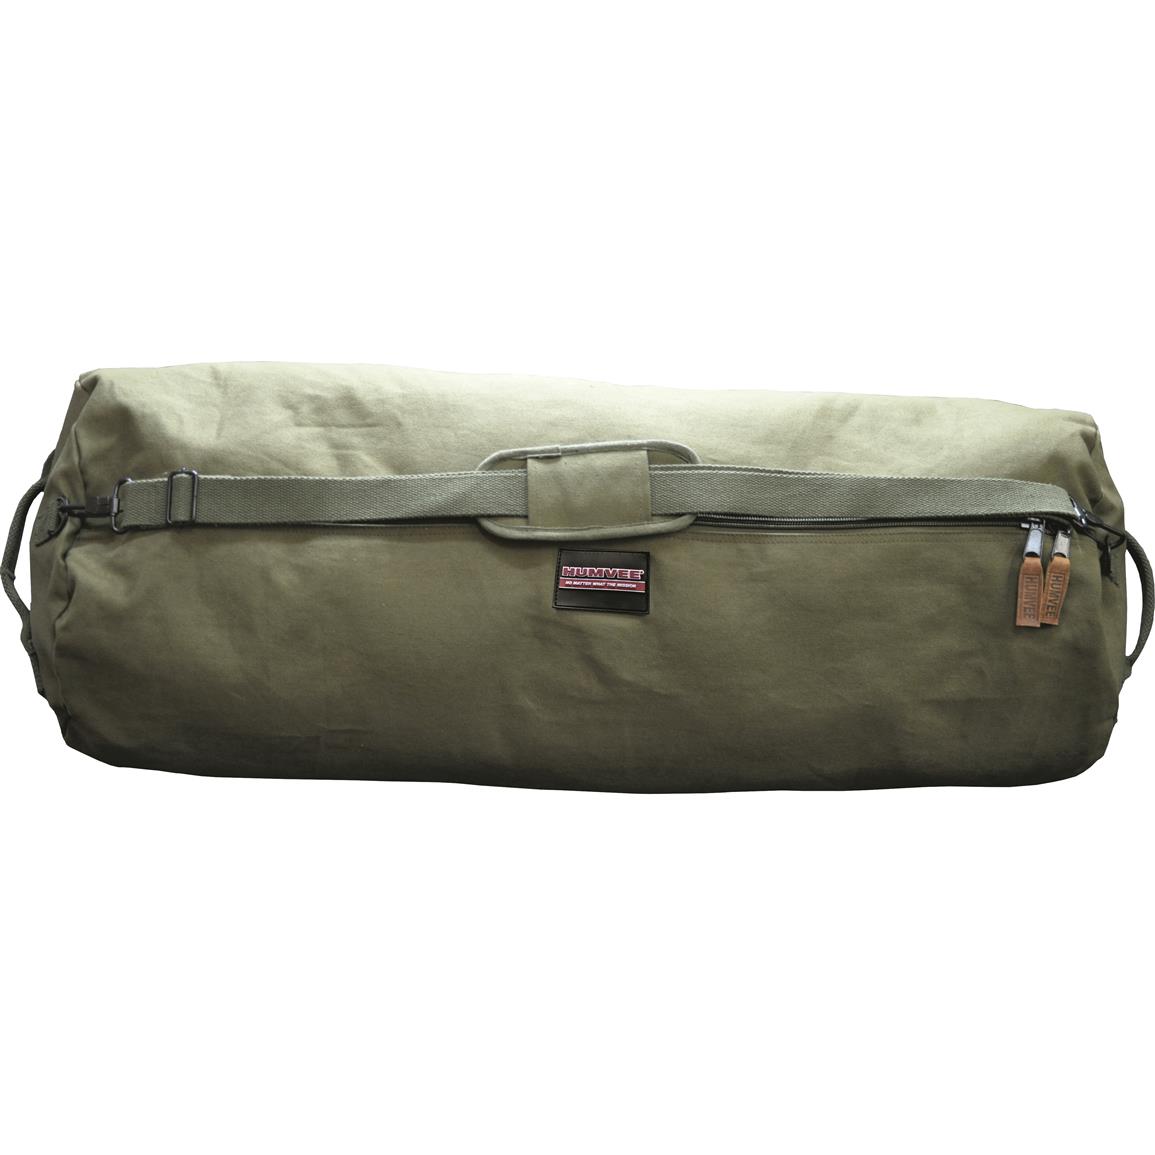 Humvee Large Duffle Bag - 675972, Military Style Backpacks & Bags at Sportsman&#39;s Guide